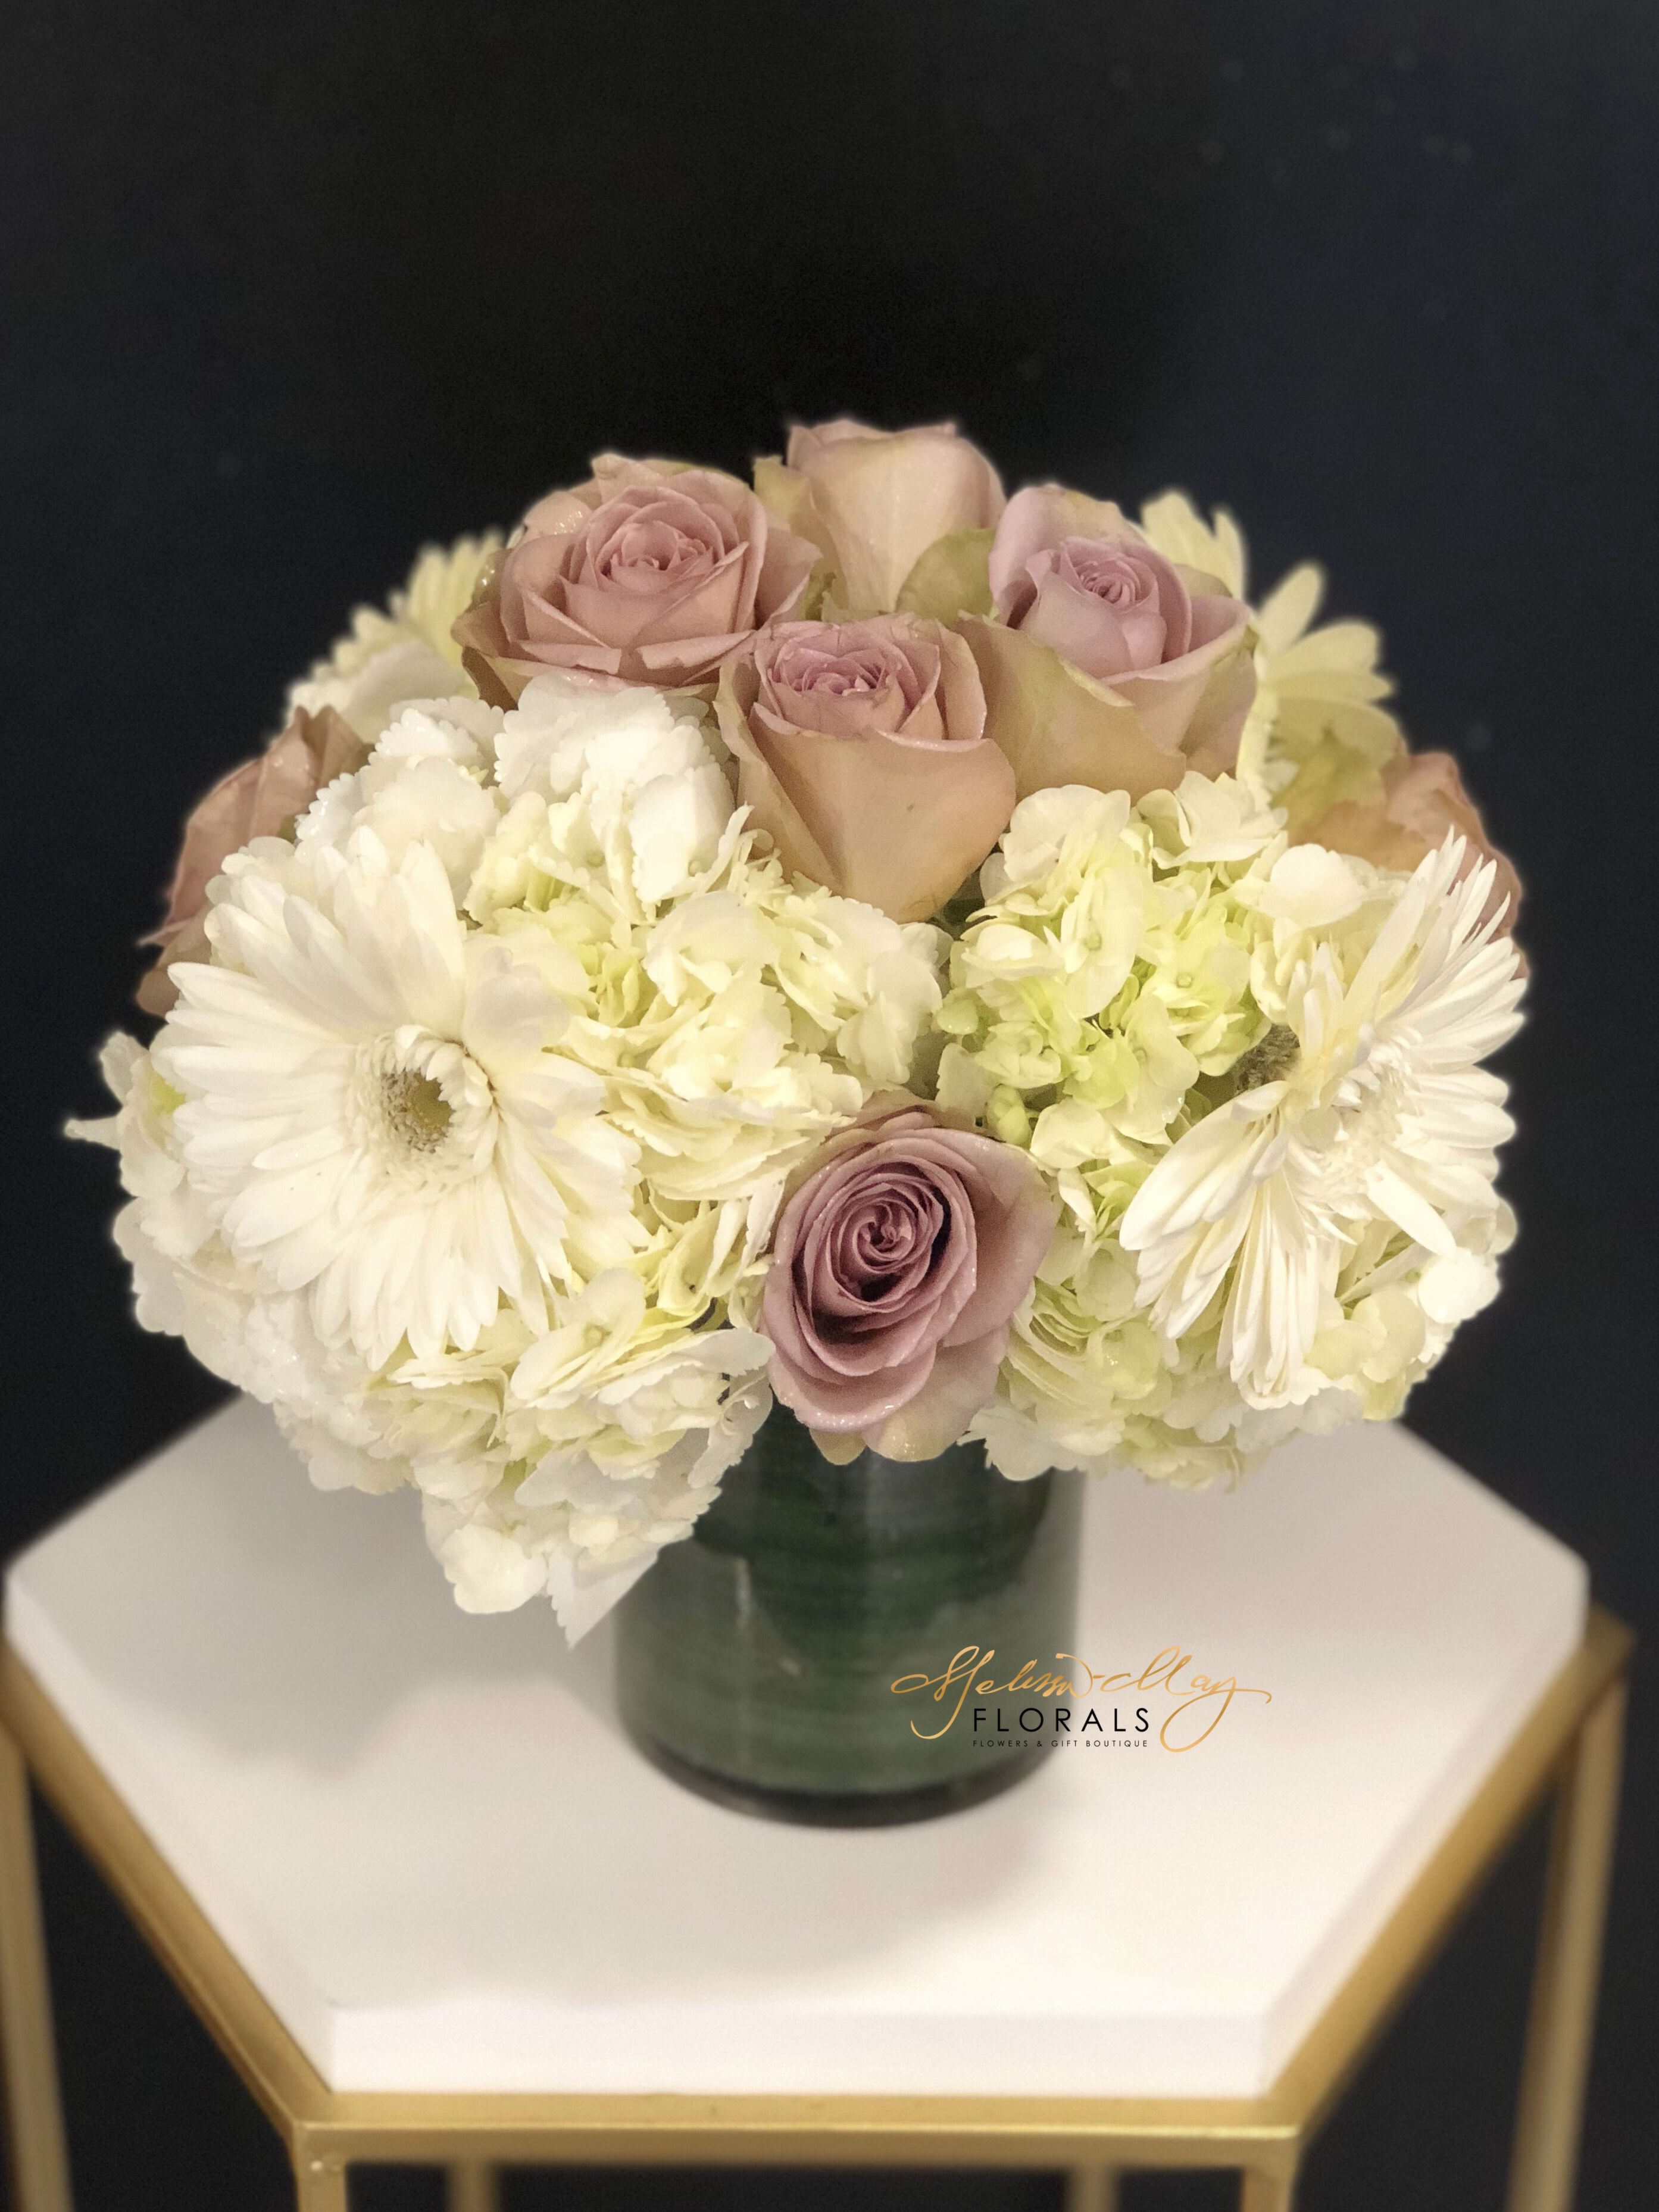 Sprinkle of Purple - A touch of purple to bring out a white arrangement. Sometimes you want an arrangement that is simple but will provide an elegance like no other. A sprinkle of purple will do just that there is white Hydrangeas and lavender roses. 